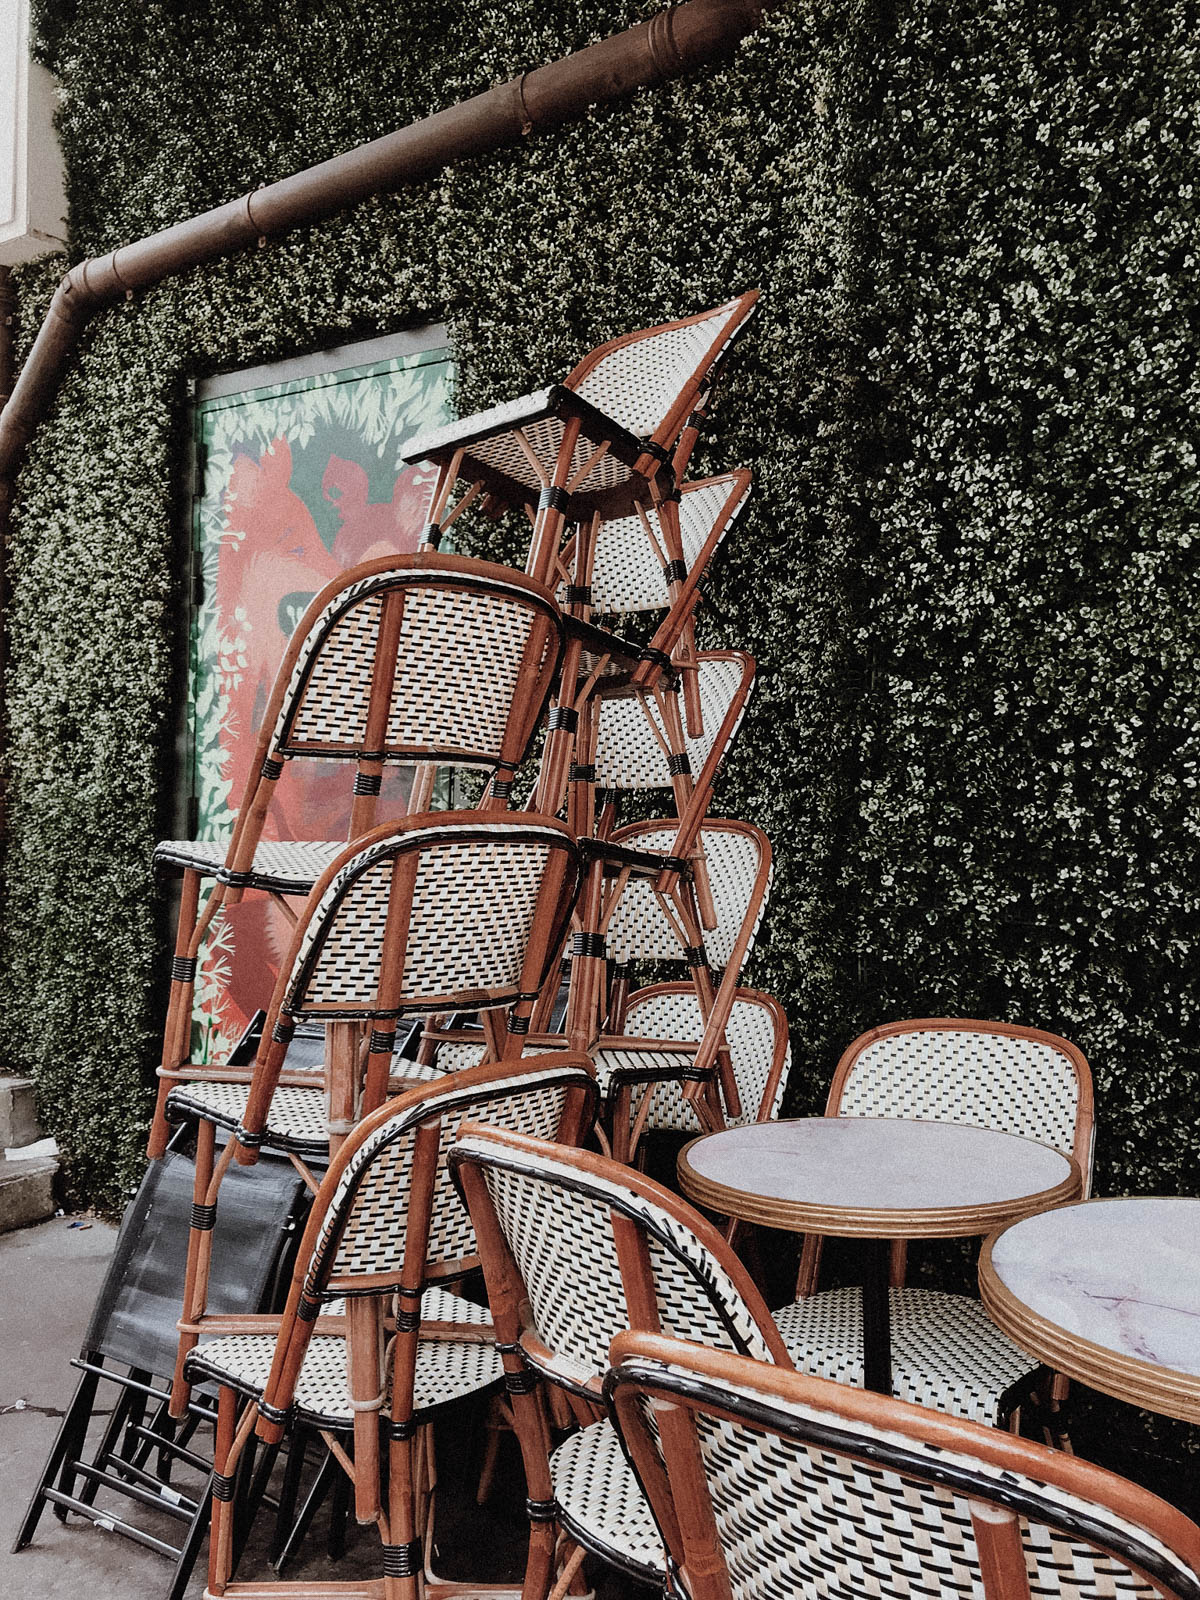 Paris France Travel Guide - Classic Vintage French Cafe Tables and Chairs / RG Daily Blog